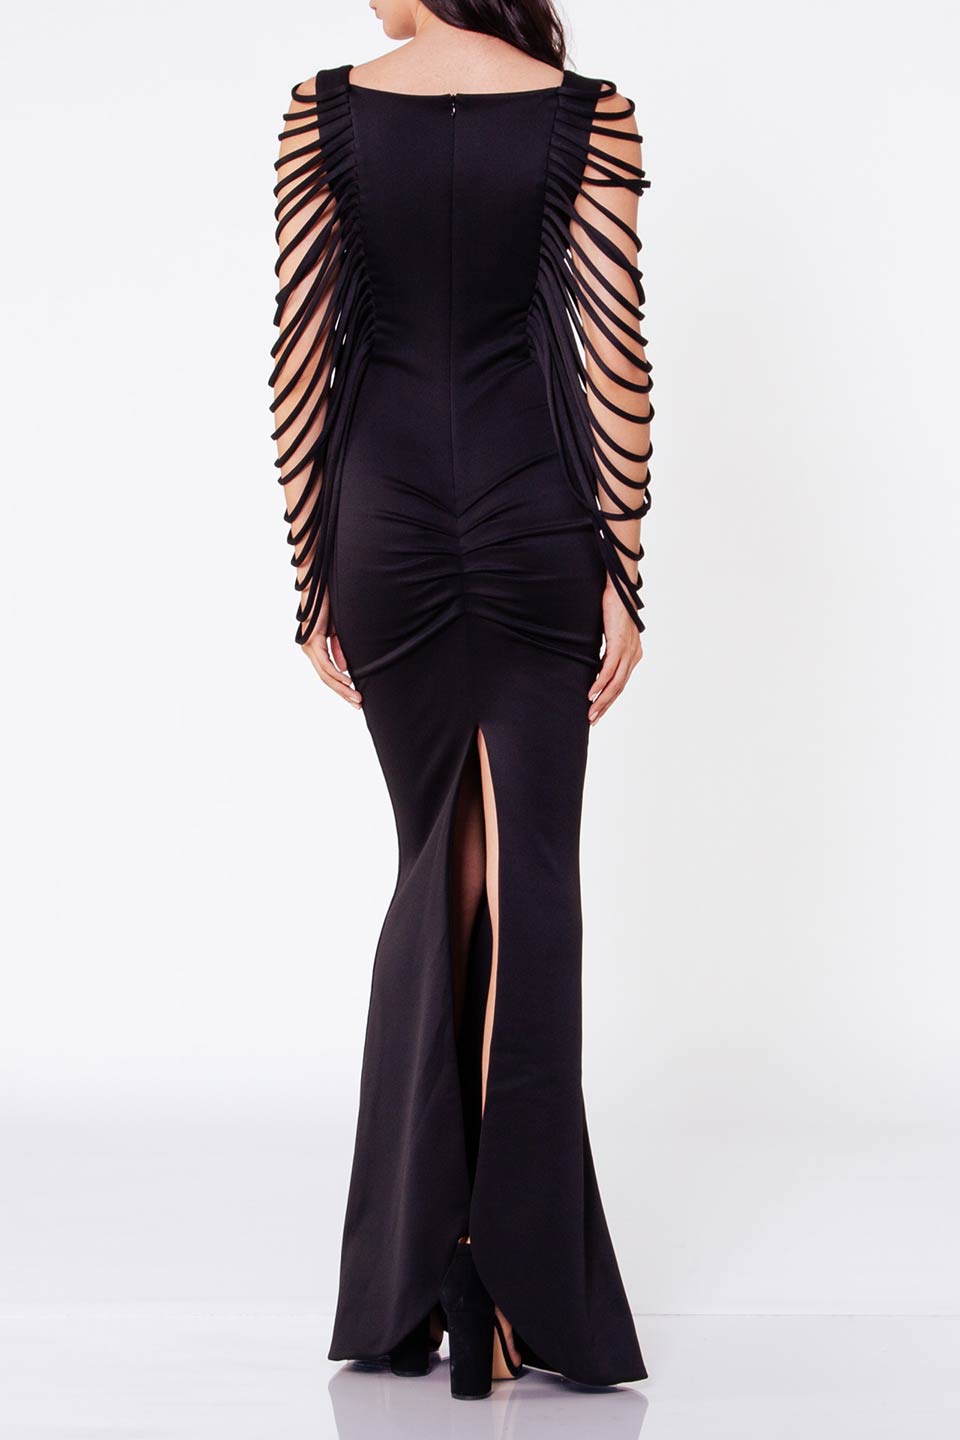 Thumbnail for Product gallery 2, Fashion designer maxi dress with fringe sleeves. Online product back view